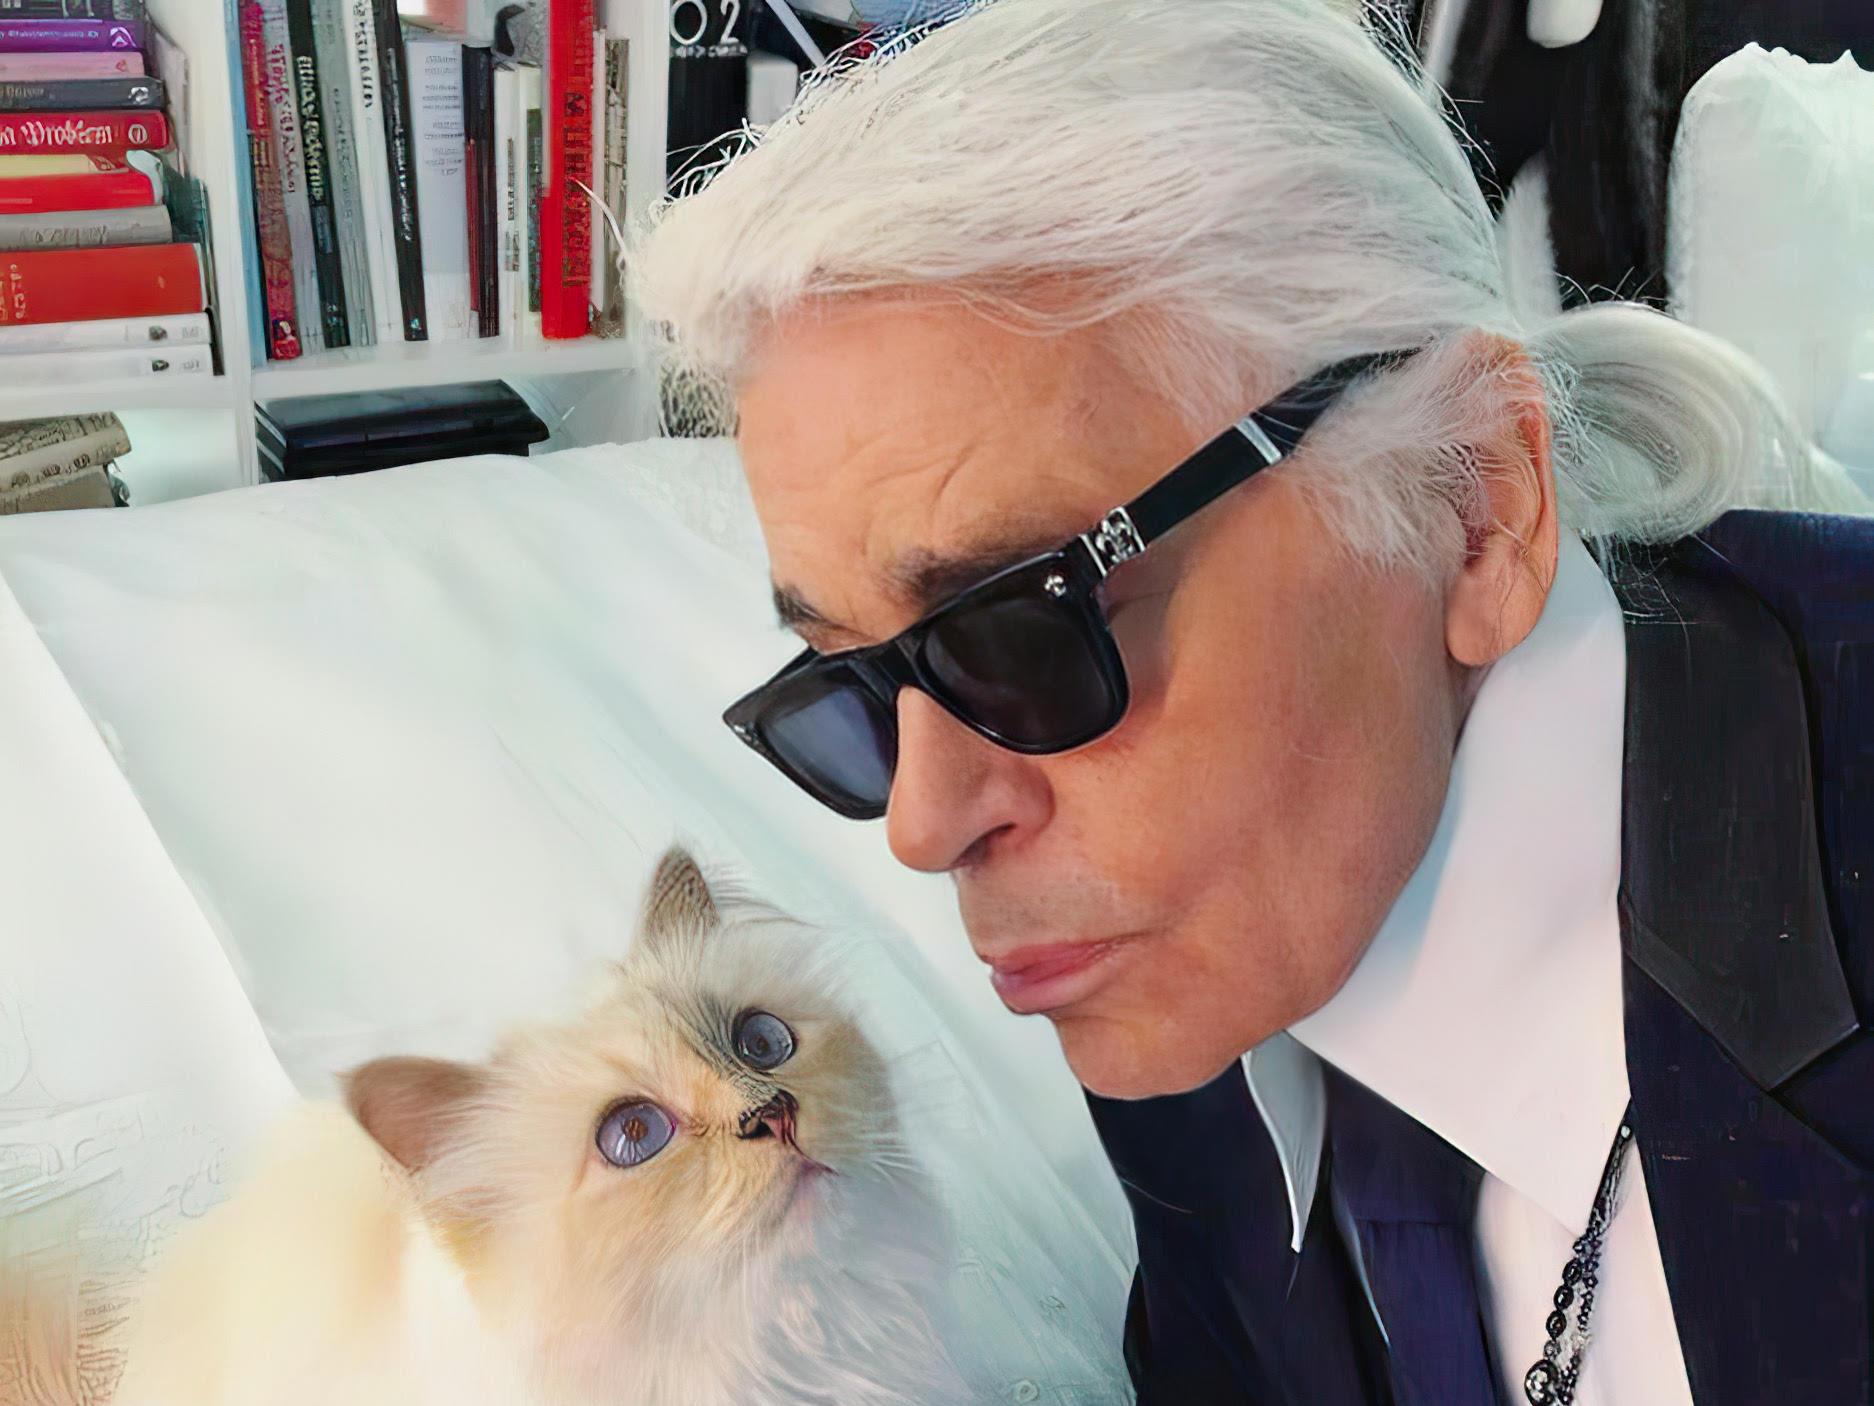 Karl Lagerfeld Invented Everything You Love and Fear About Fashion